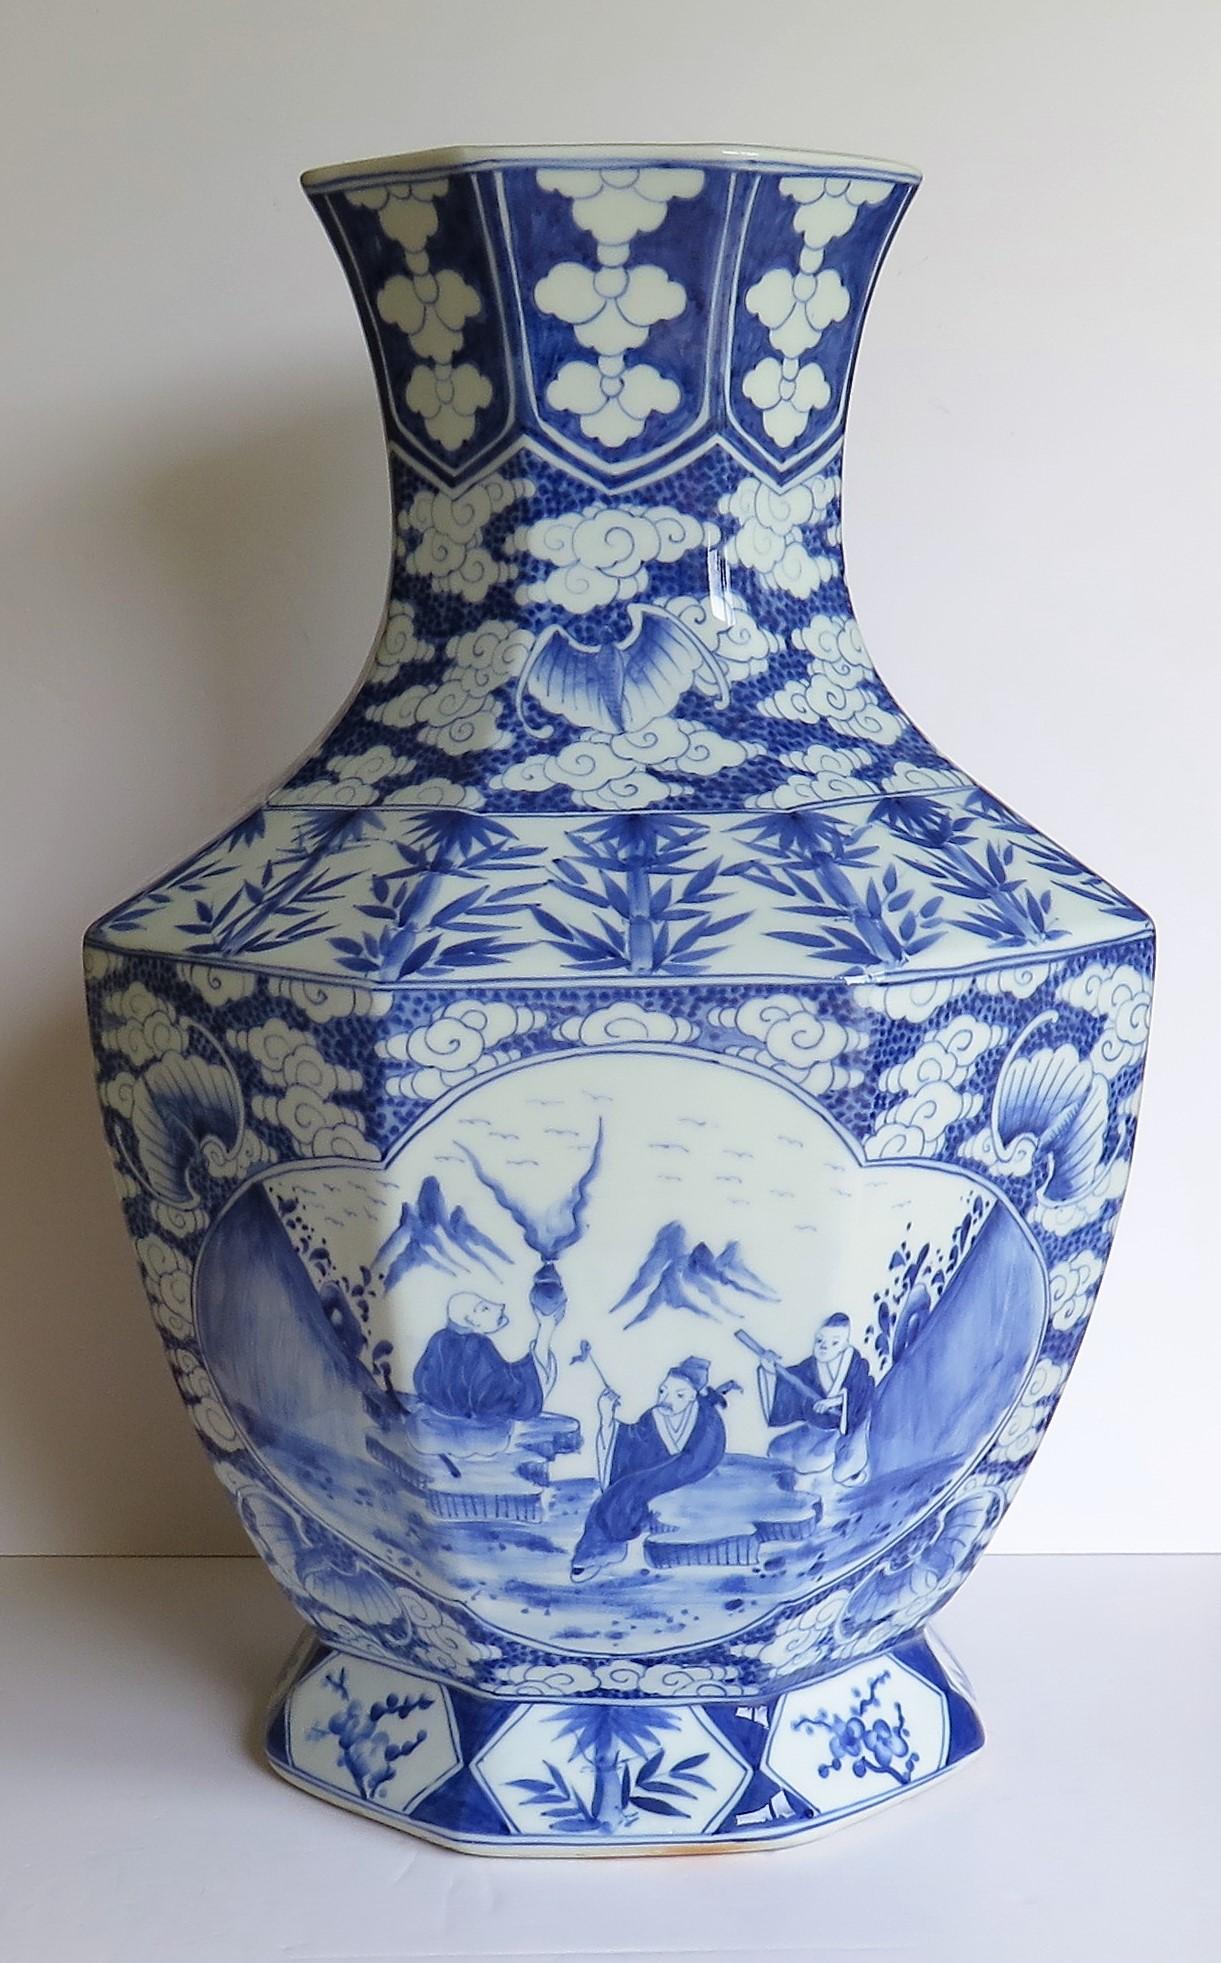 This is a very impressive and beautifully hand painted porcelain Chinese baluster Vase raised on a footed base and dating to the early 20th century, circa 1920.

This vase has an interesting octagonal shape raised on a low foot and with a slightly